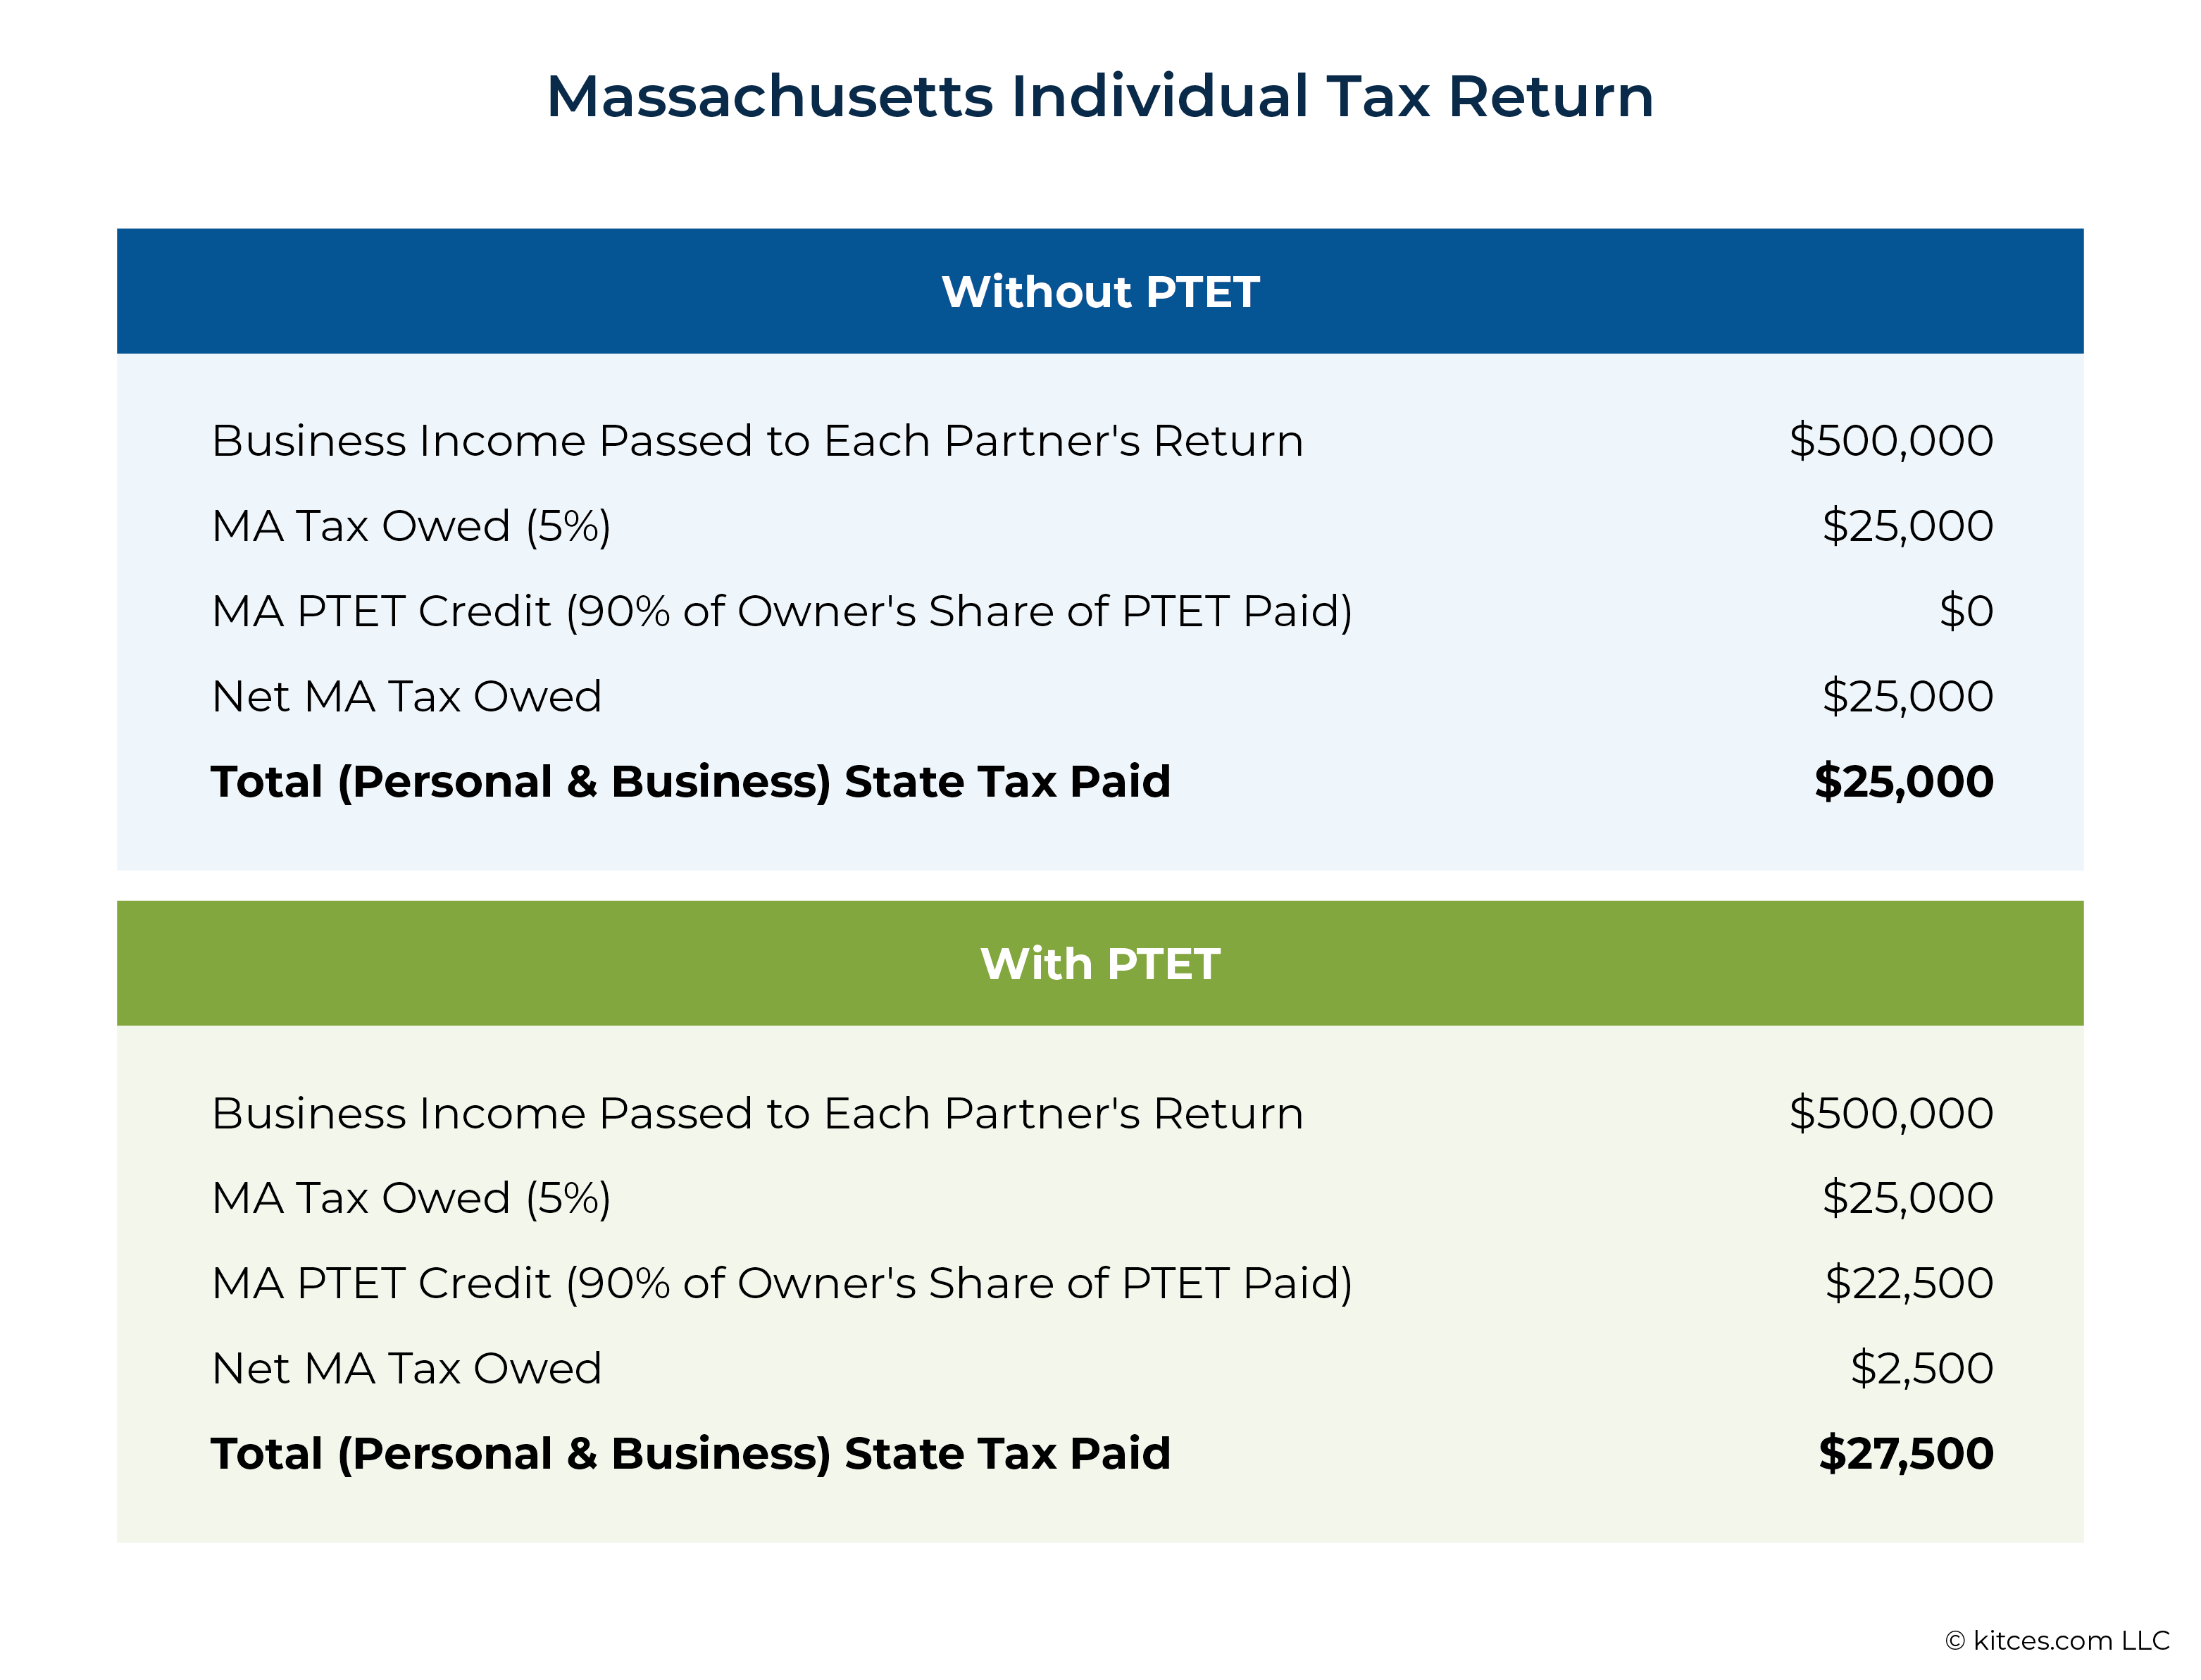 B MA Individual Tax Return With Without PTET